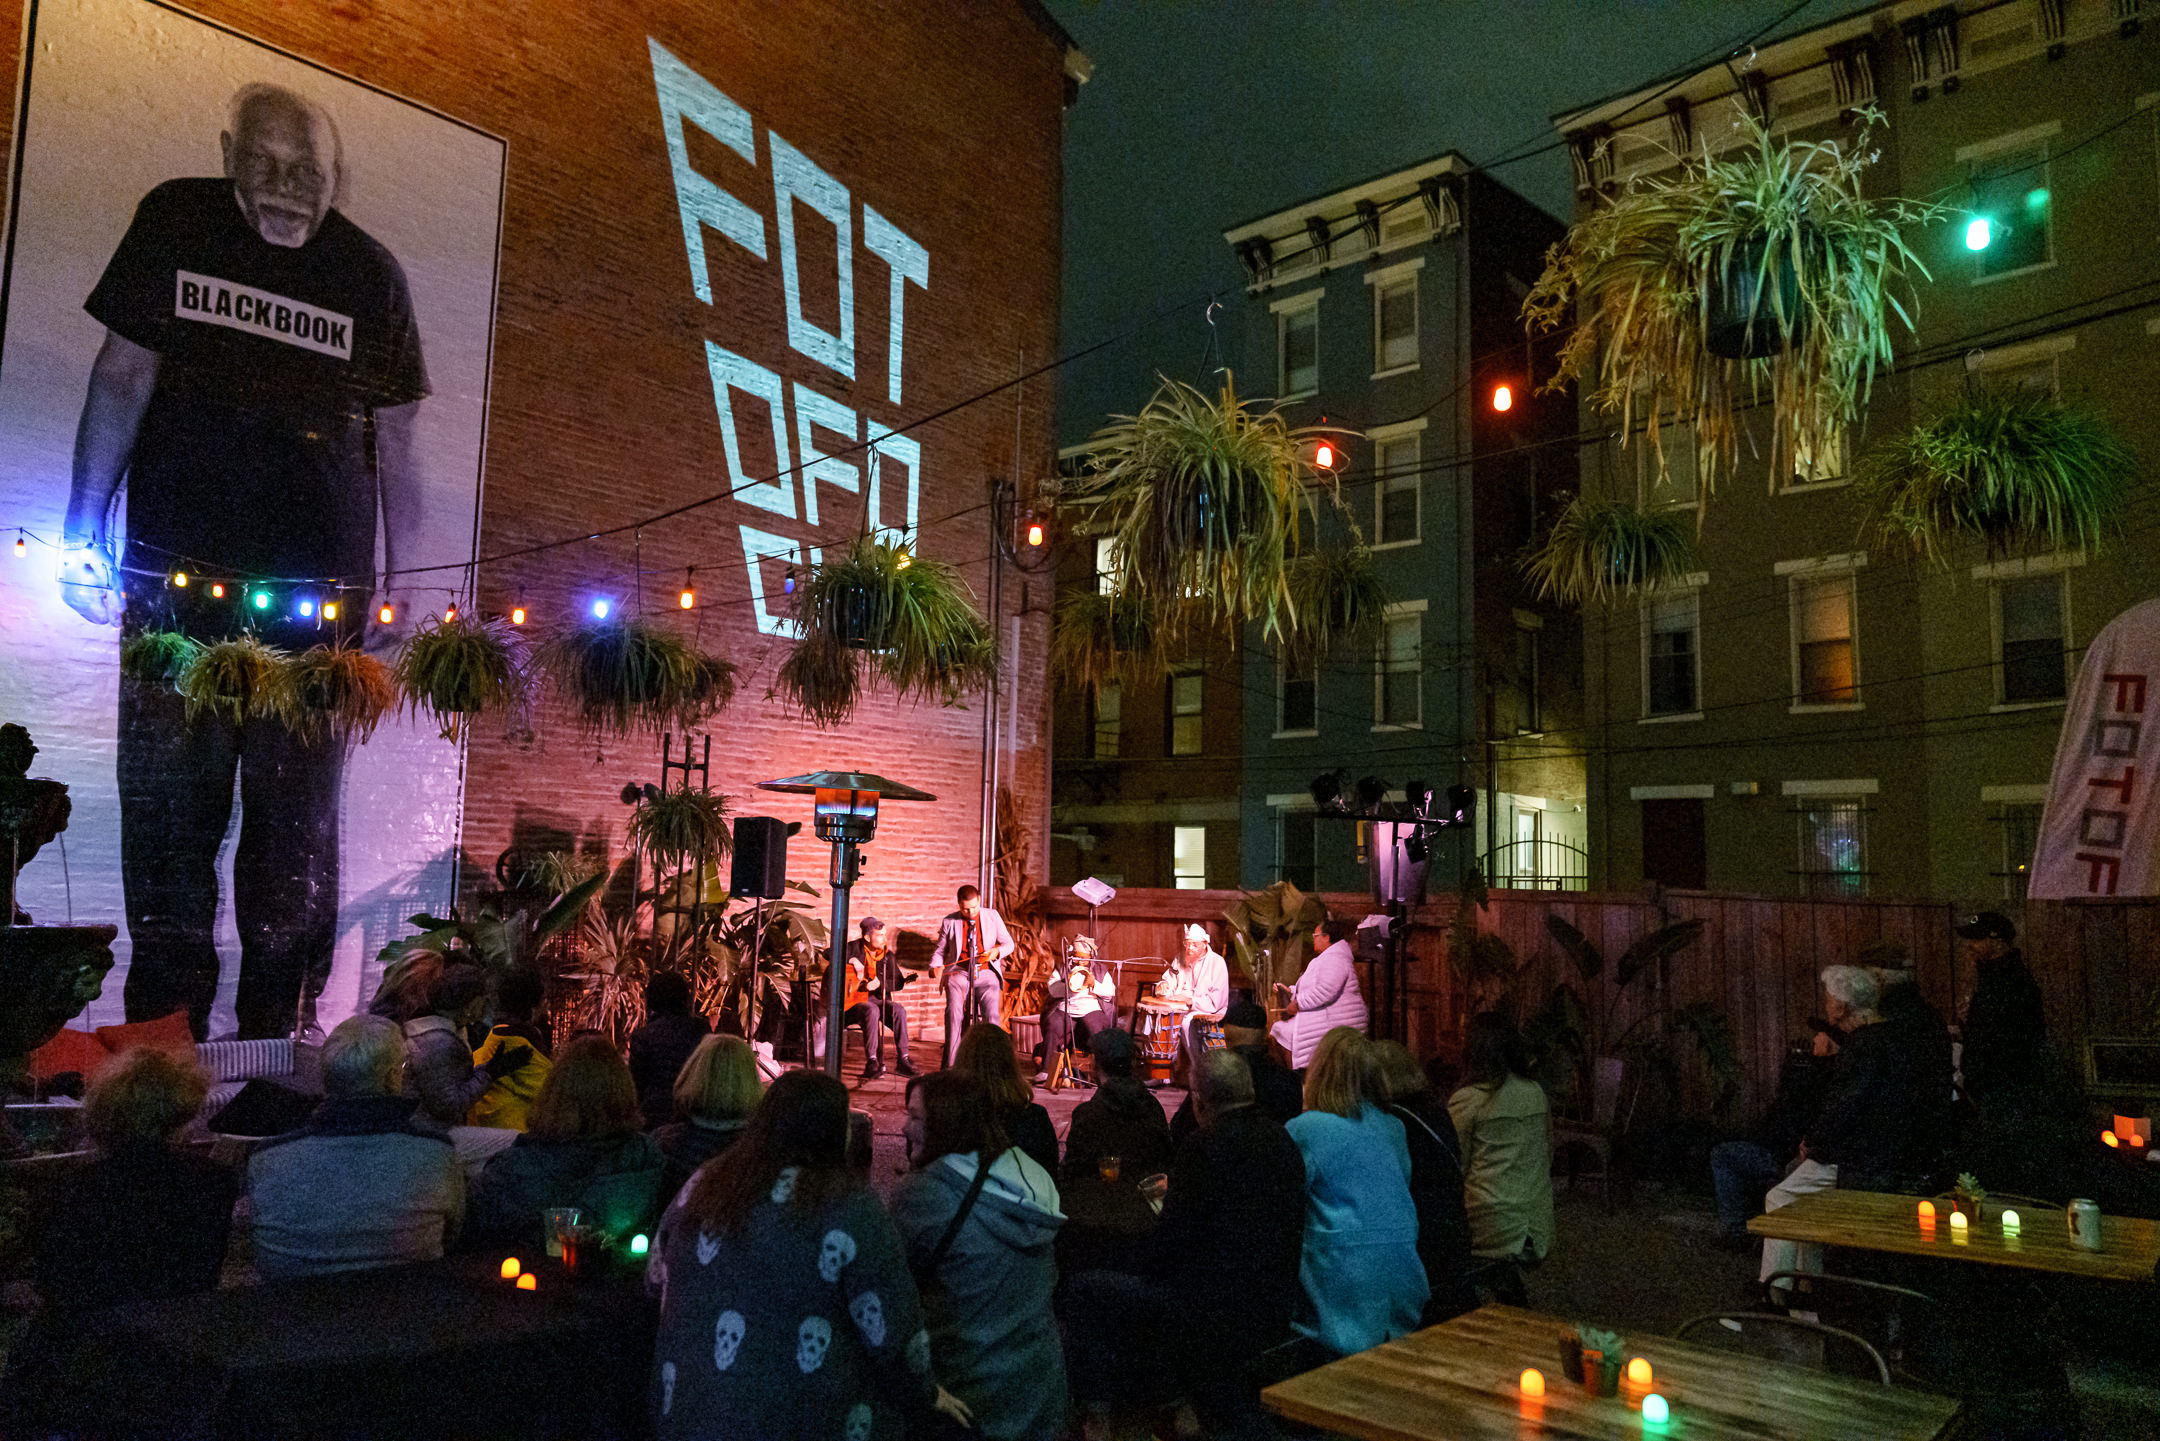 Musical performers and audience in an outdoor patio surrounded by city buildings